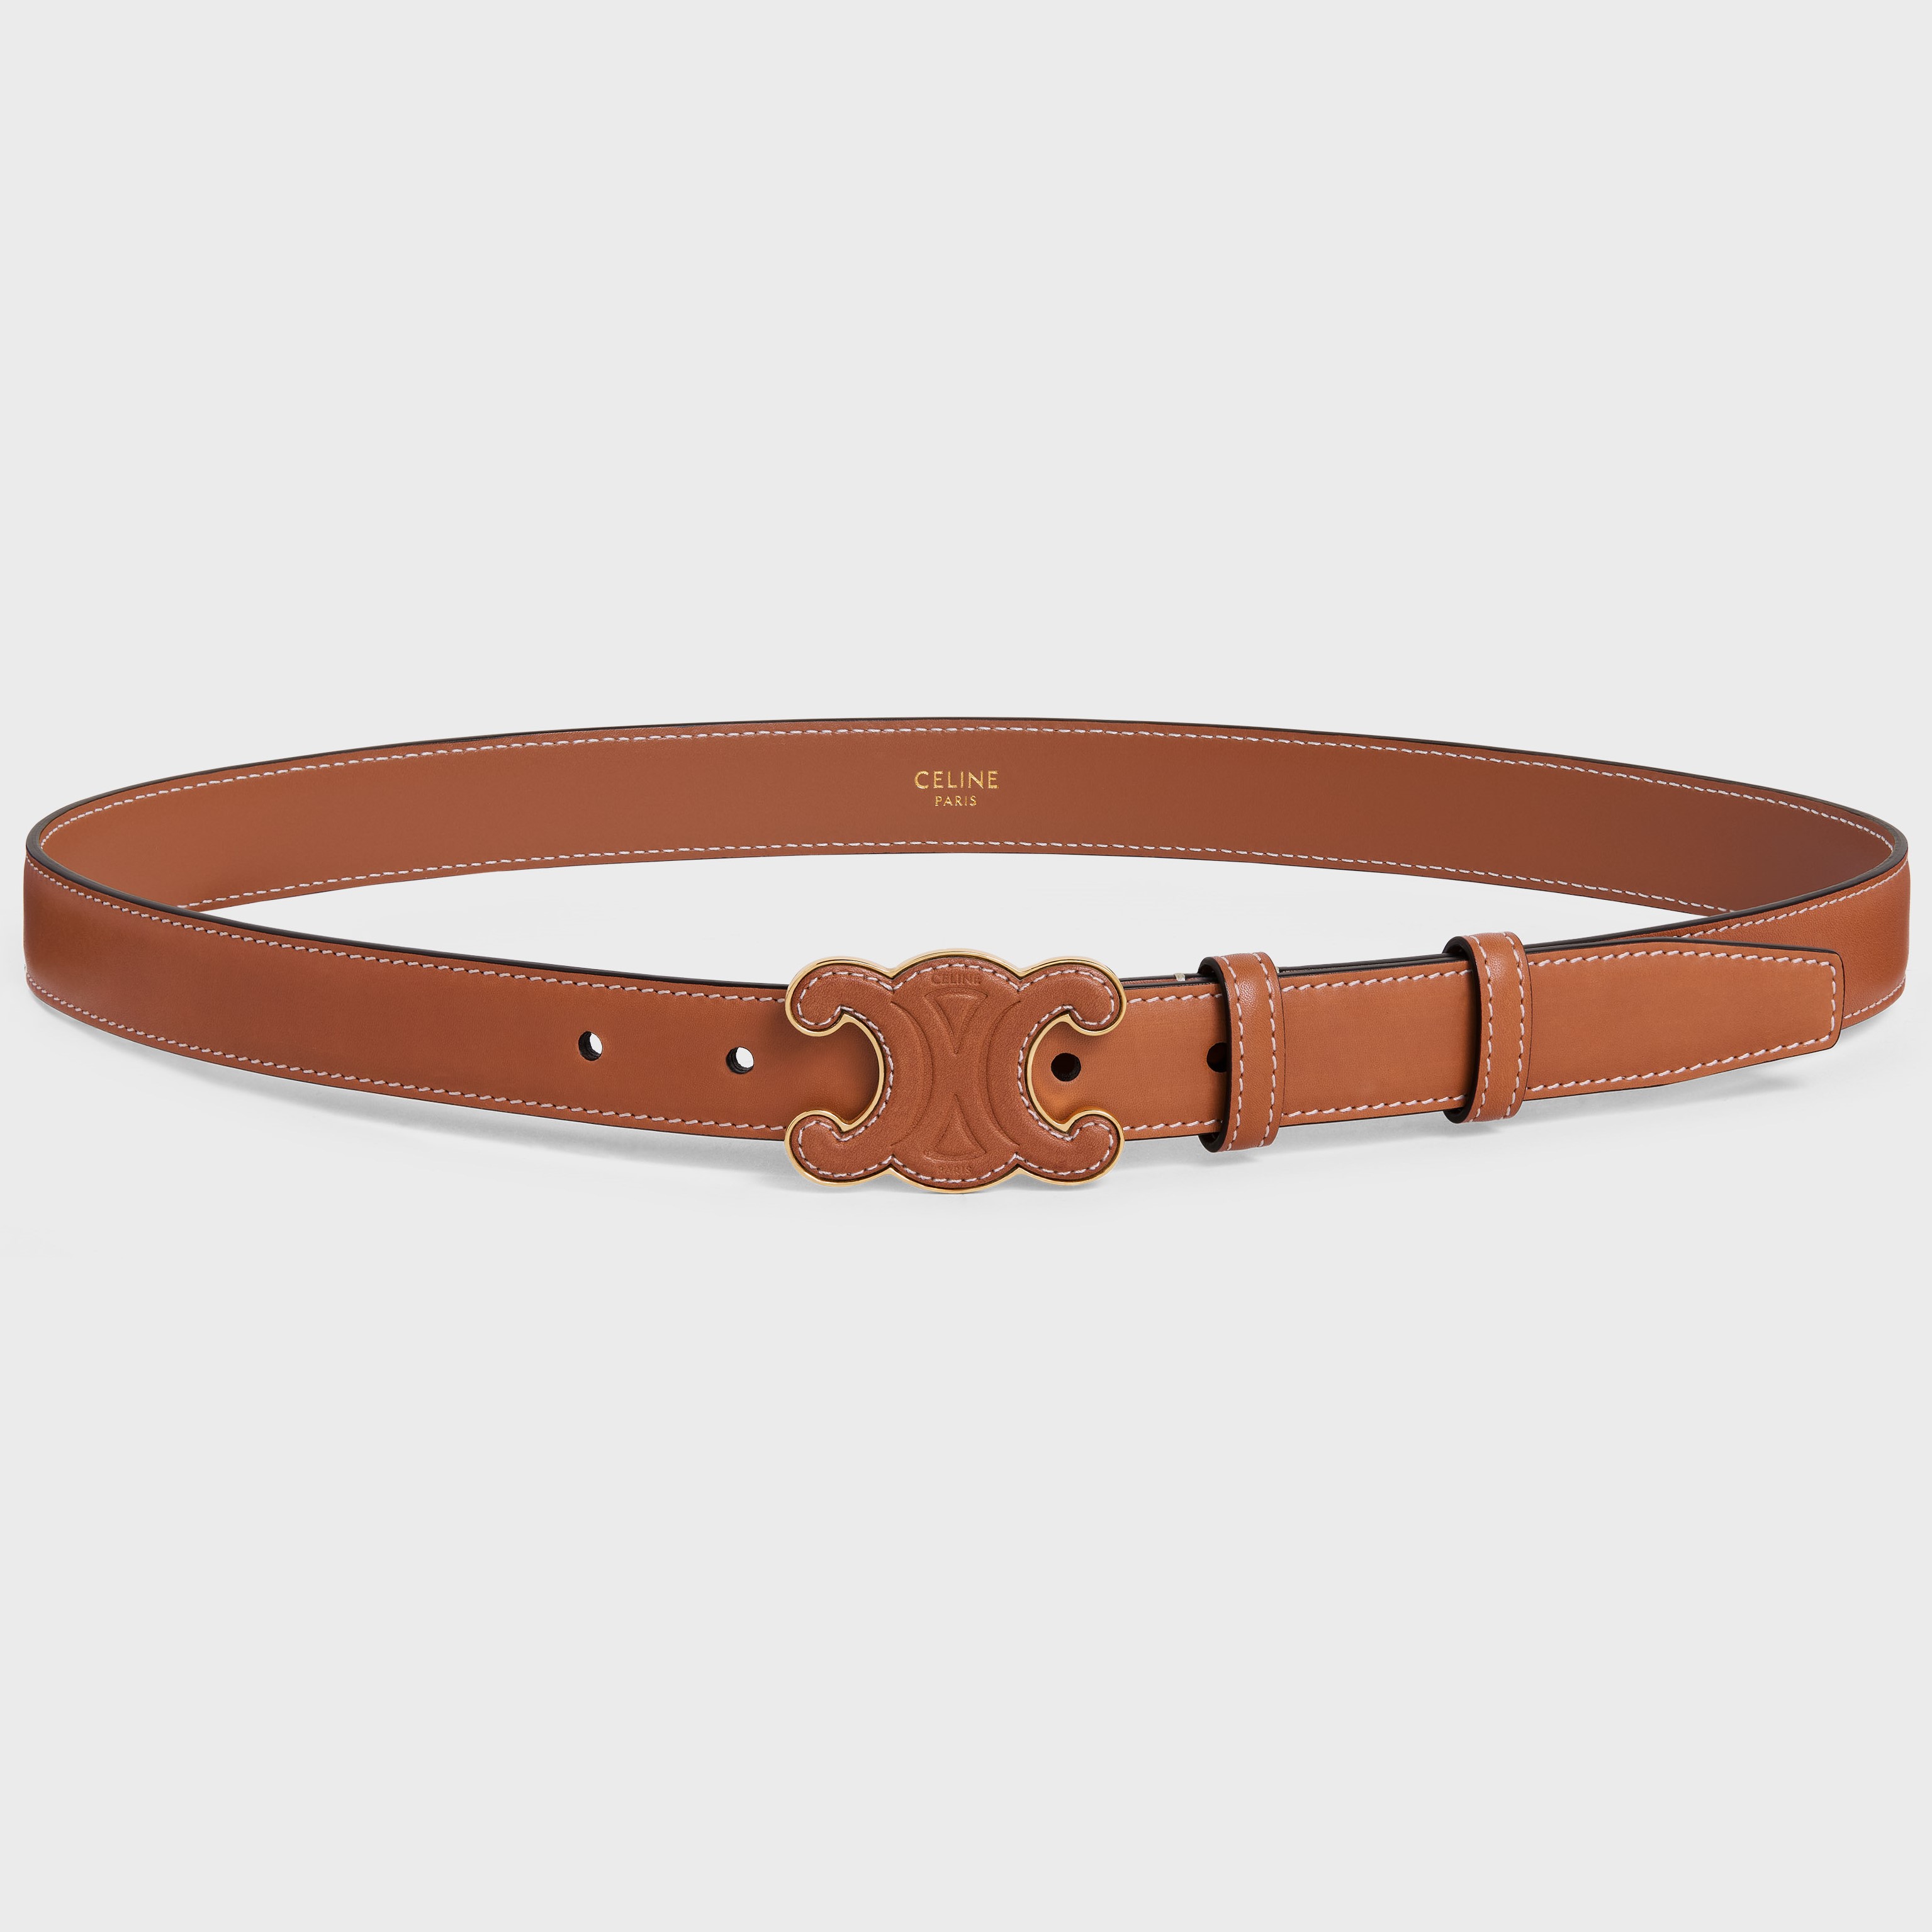 DÂY LƯNG NỮ CELINE MEDIUM CUIR TRIOMPHE BUCKLE WITH COLLAR STUD BELT IN TAN NATURAL CALFSKIN LEATHER 4